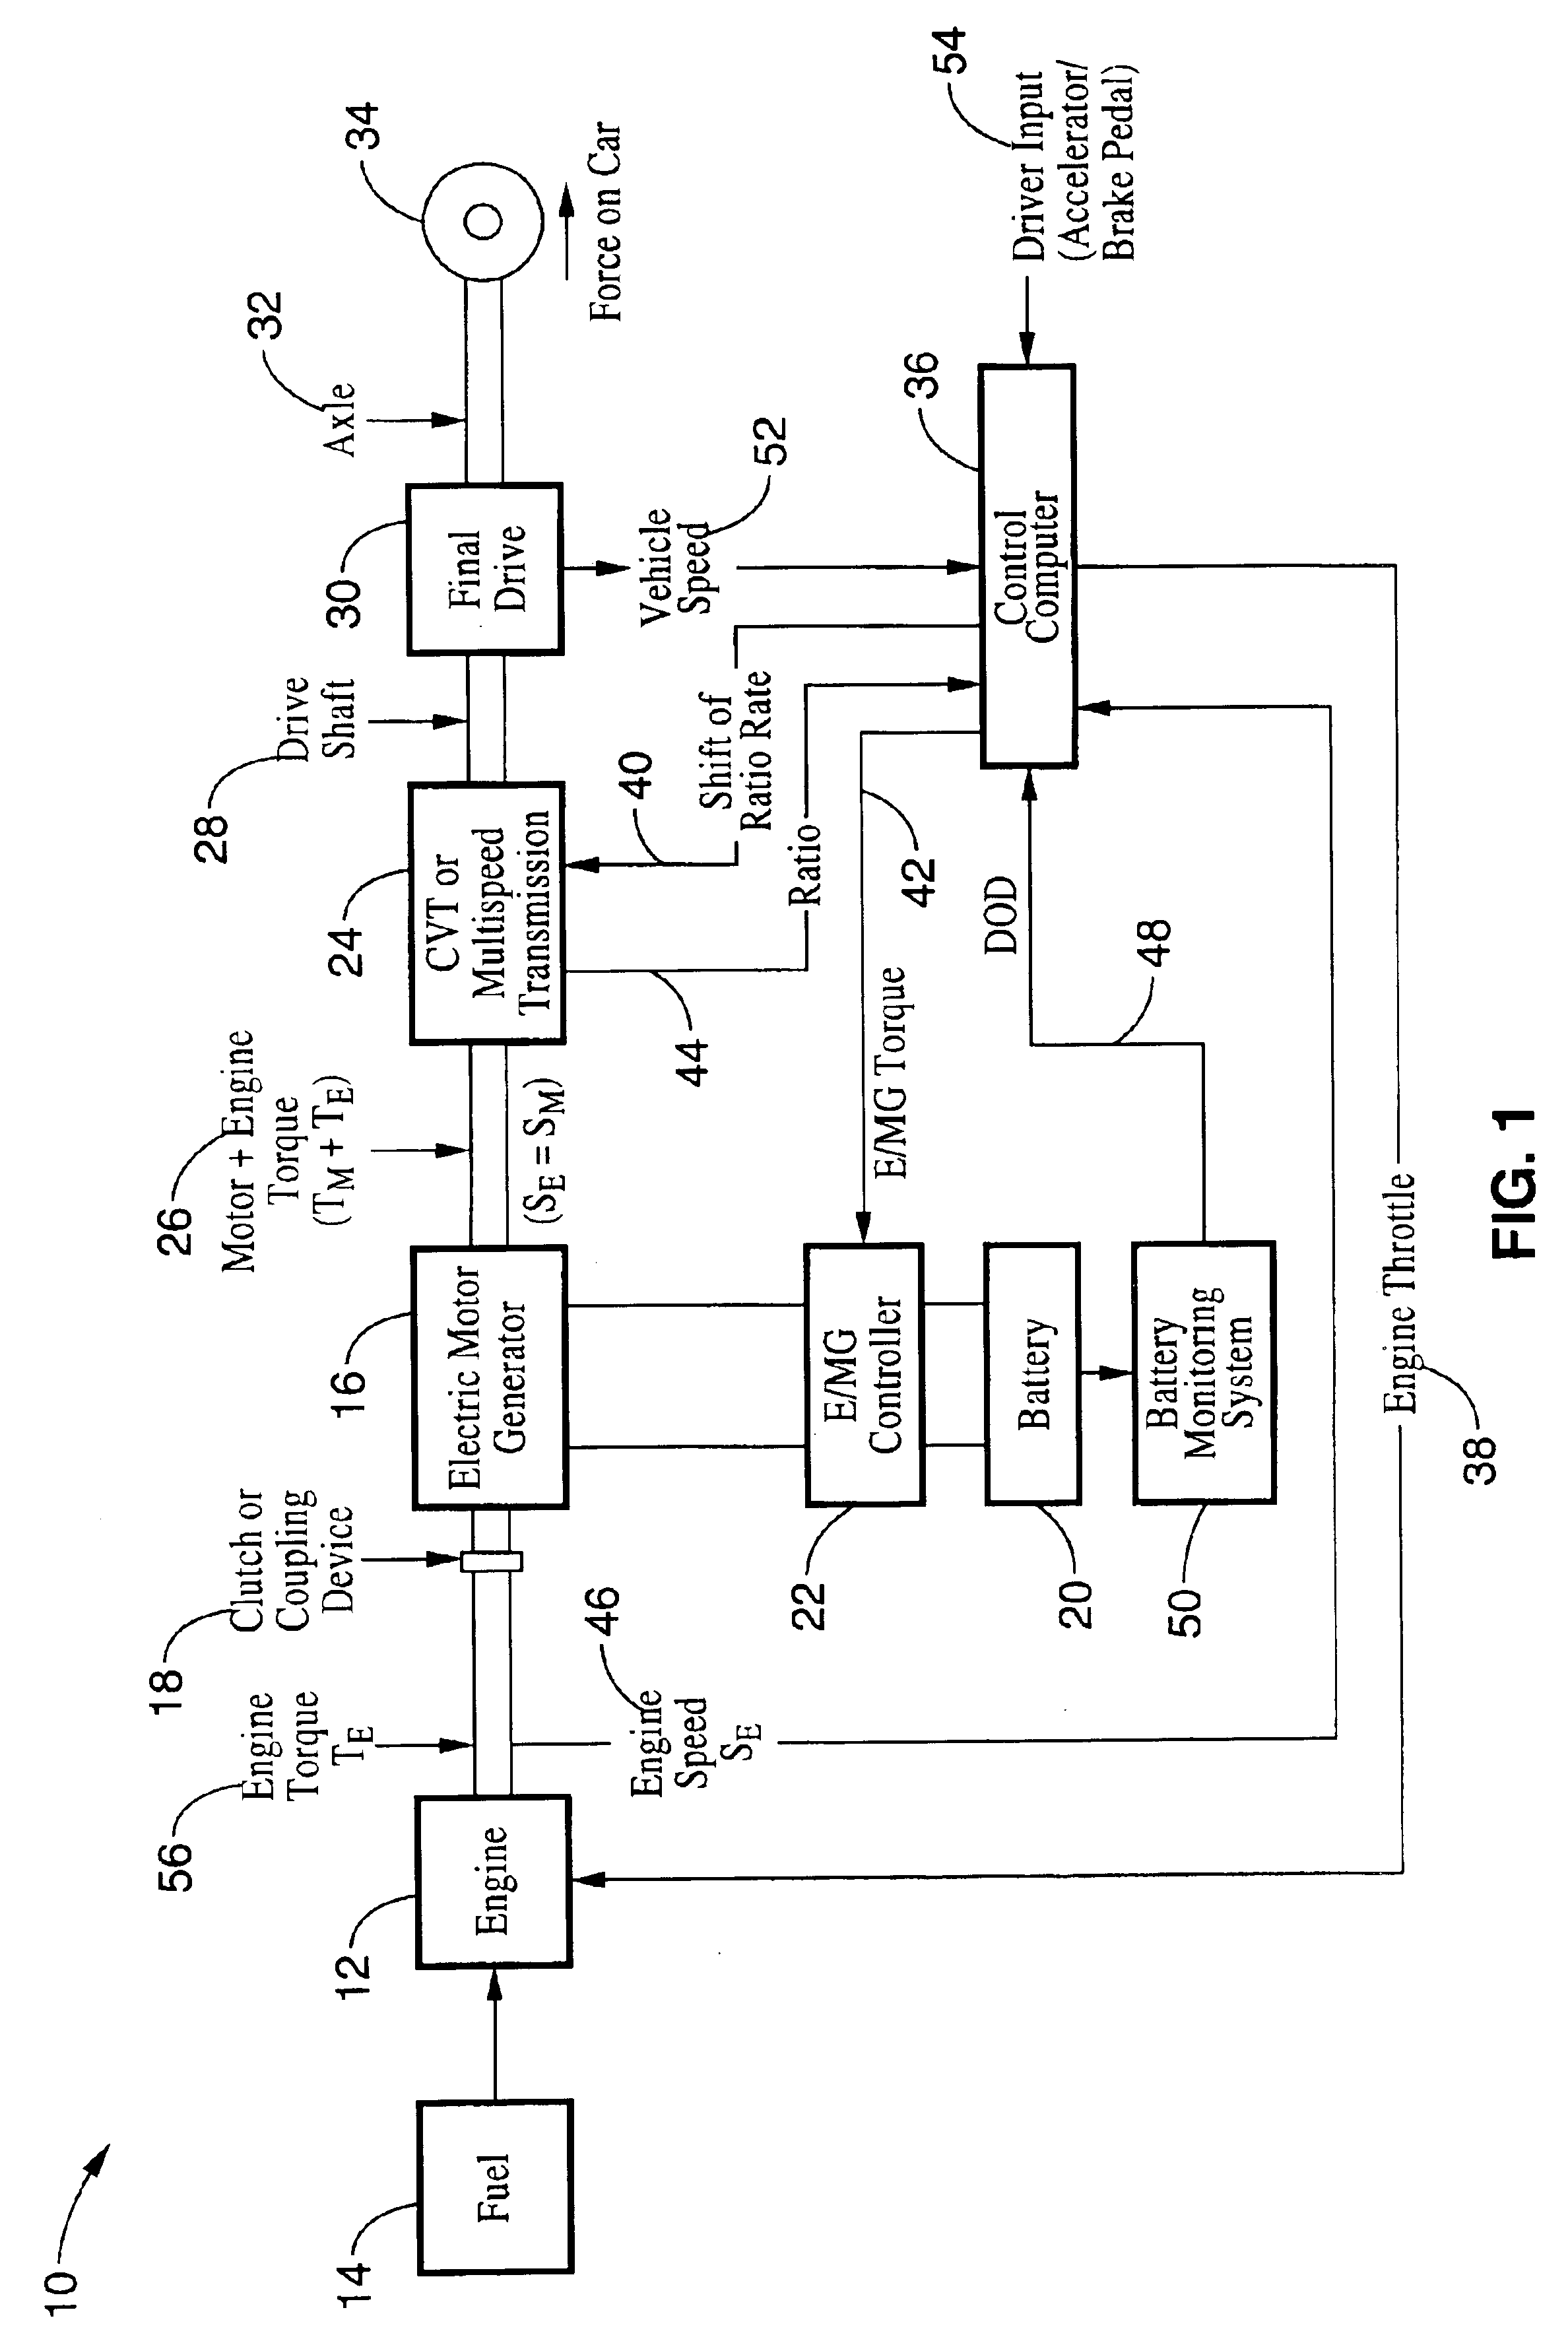 Method for controlling the operating characteristics of a hybrid electric vehicle